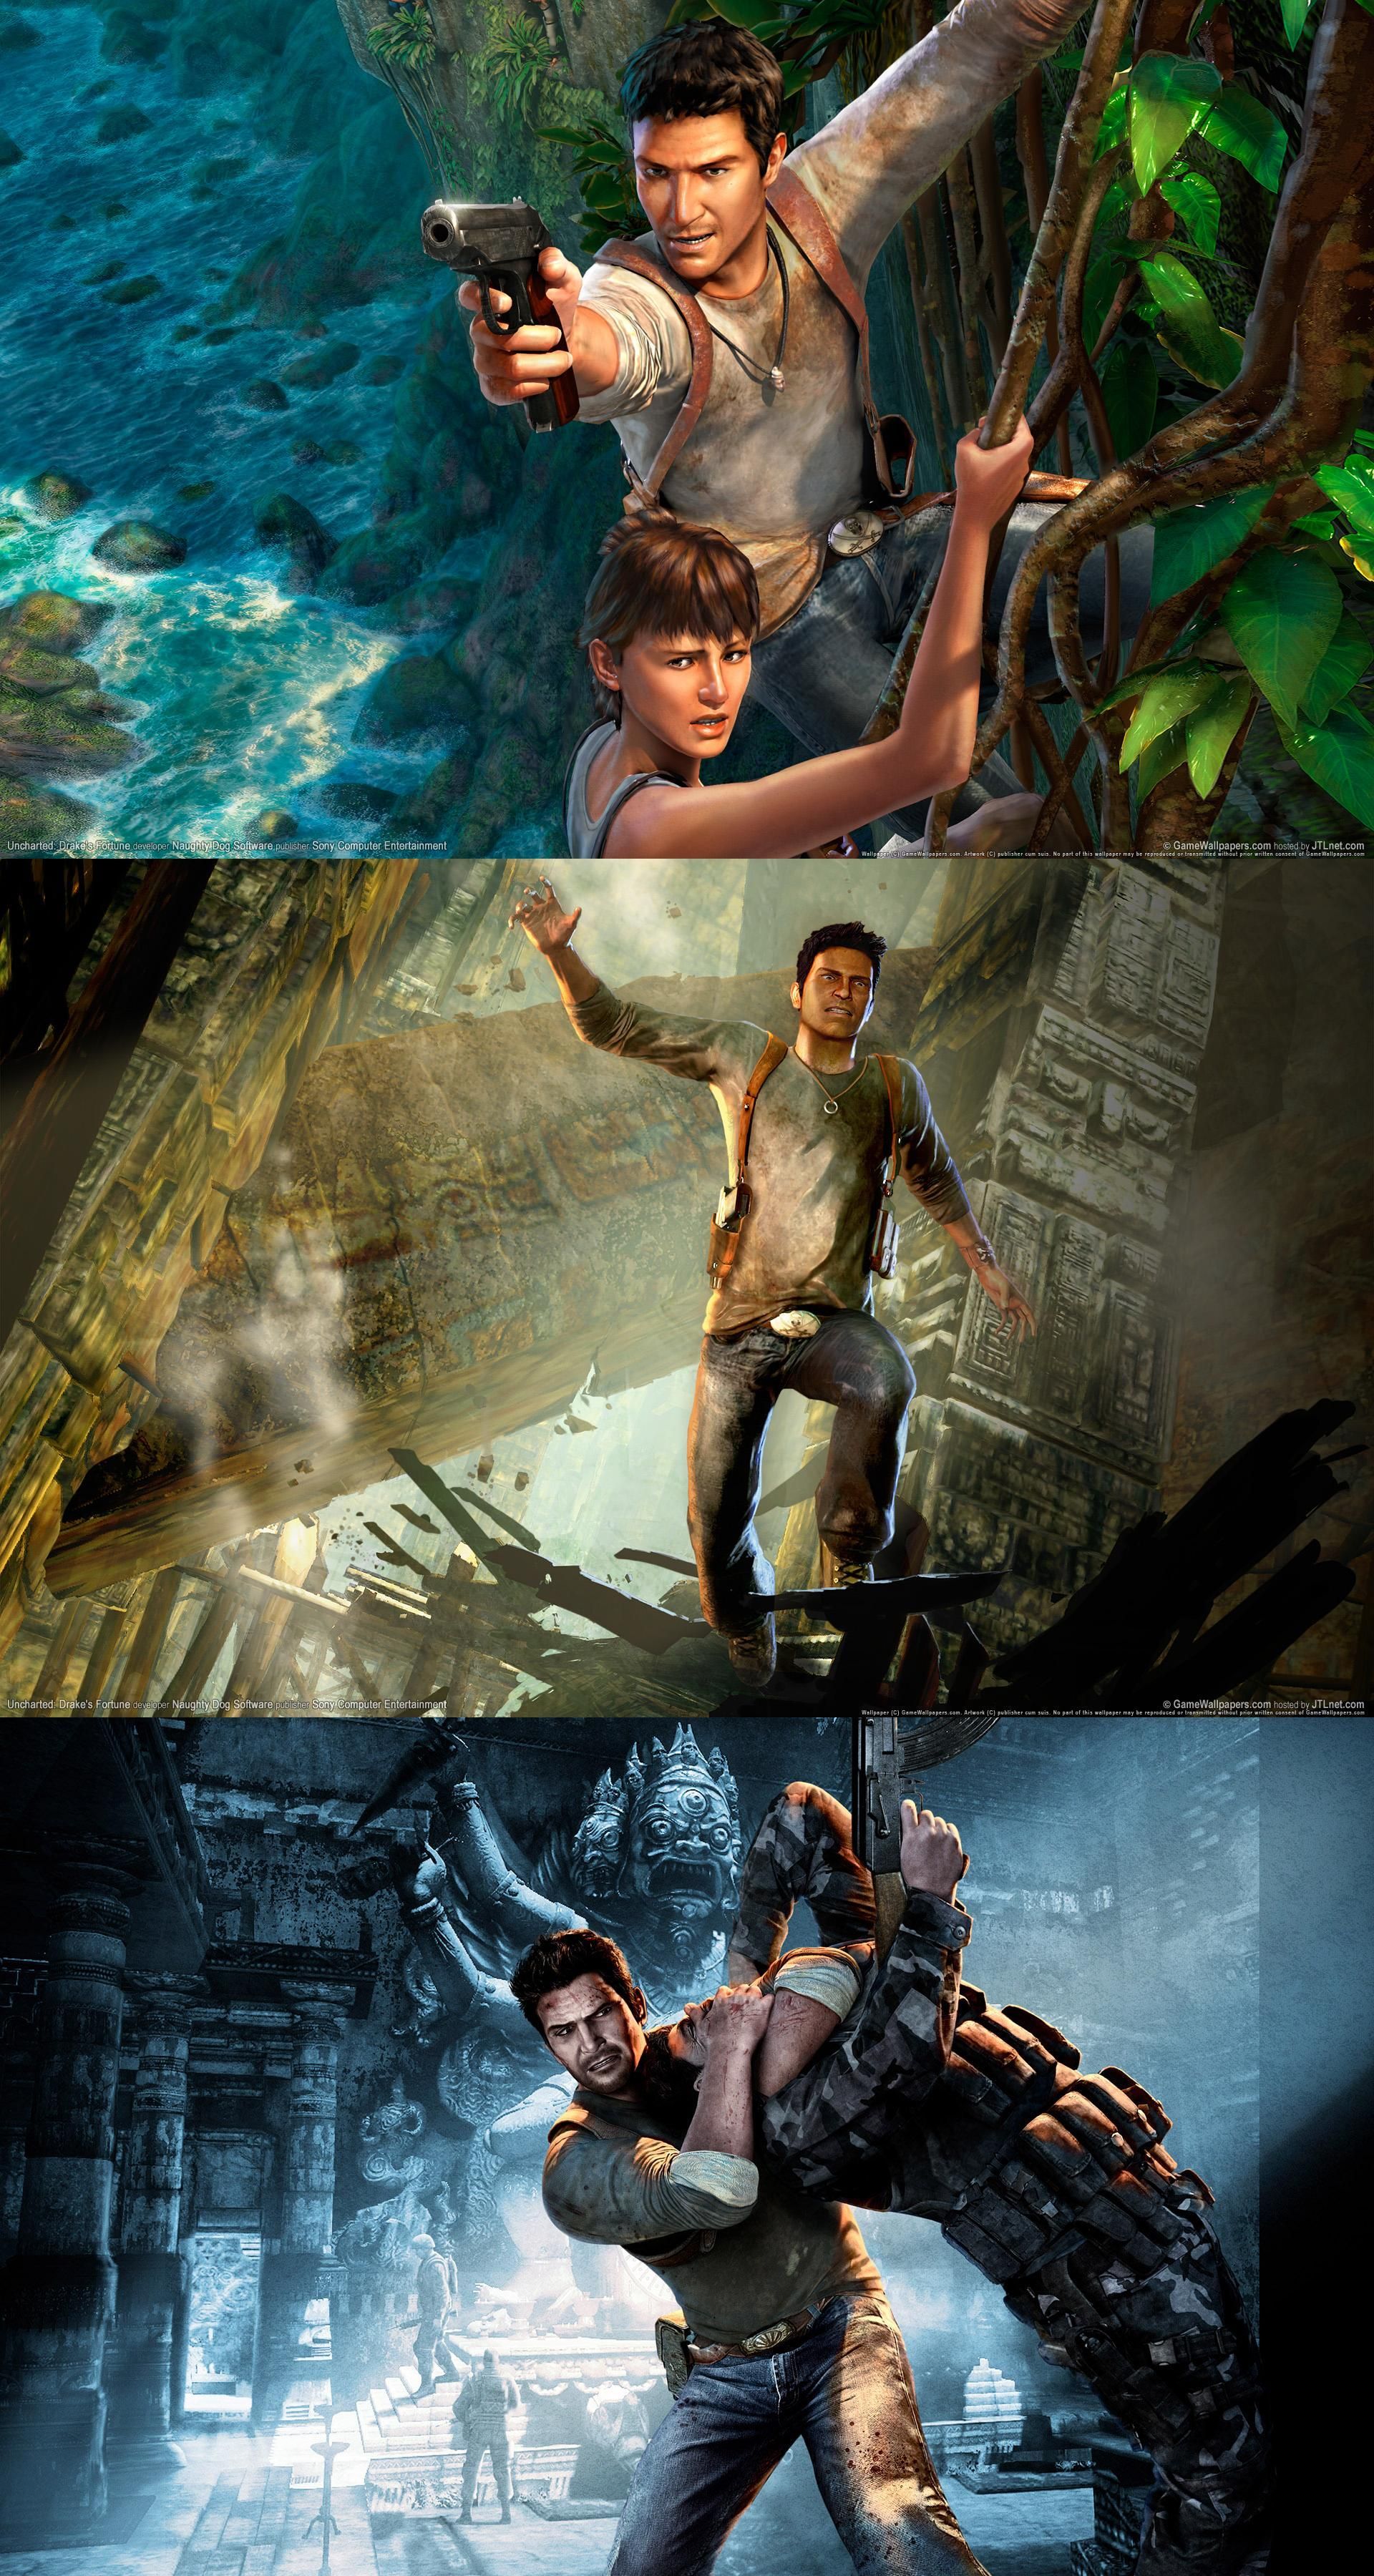 Playstation Console Download 543 wallpaper. Playstation consoles, Uncharted drake's fortune, Uncharted series